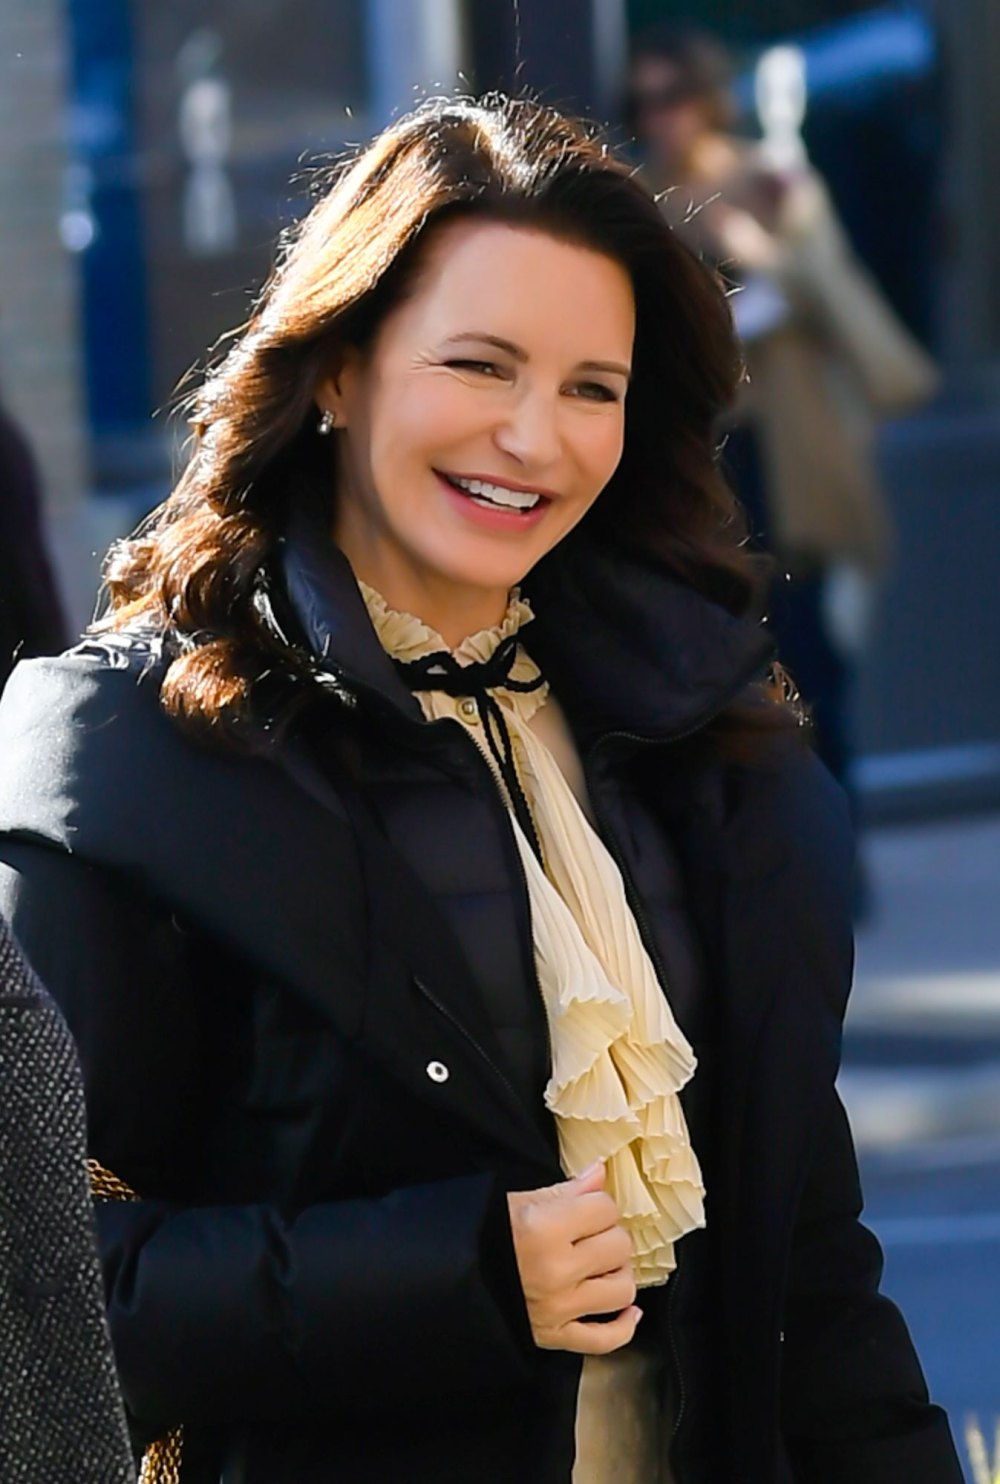 Kristin Davis has revealed a fresh-faced face after dissolving fillers